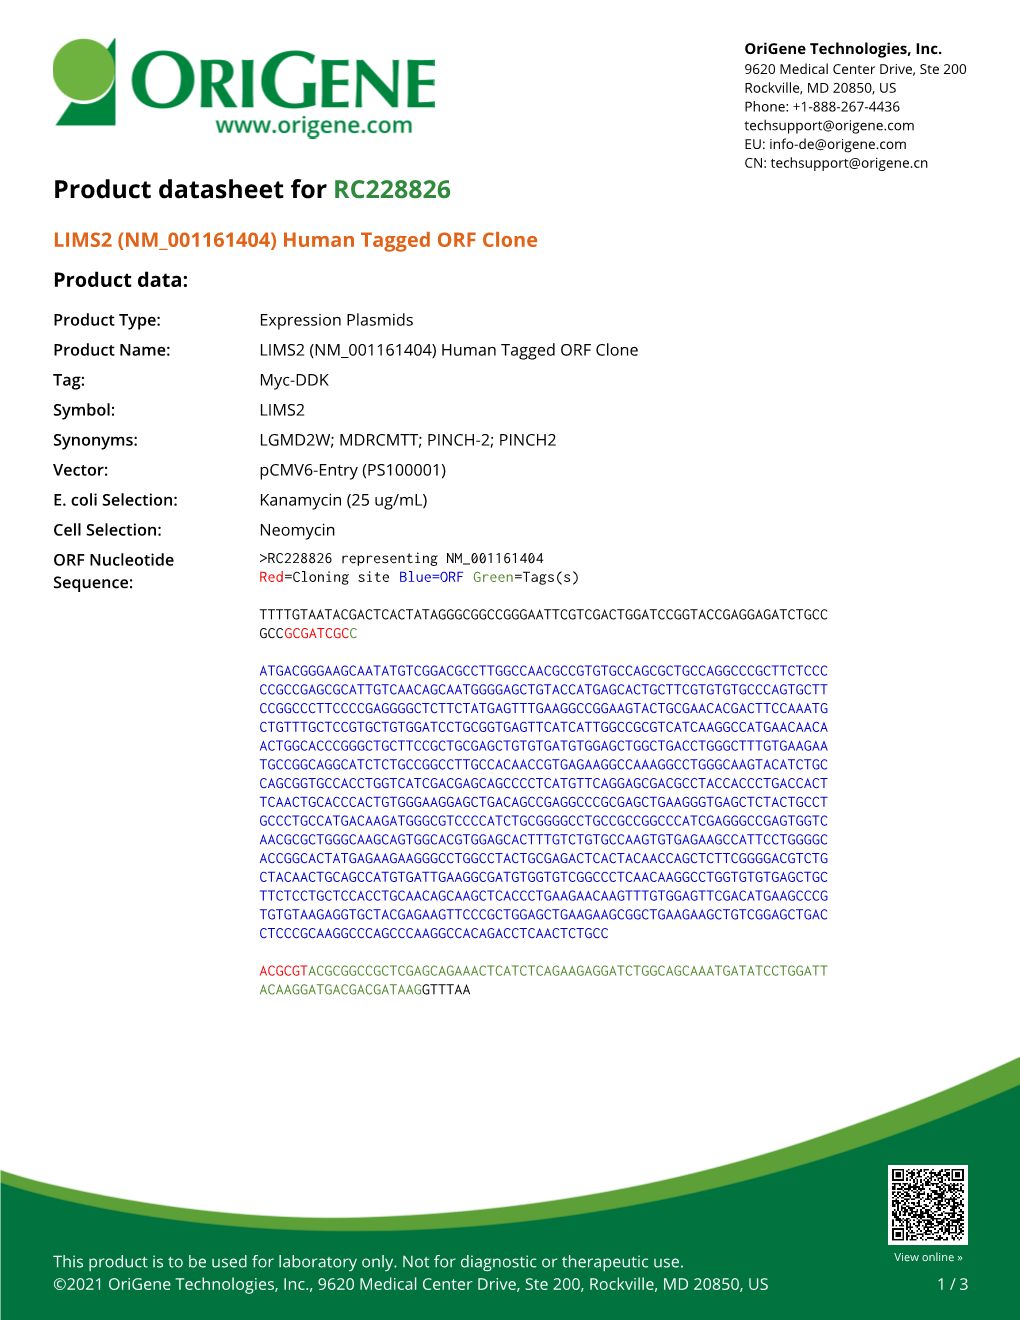 LIMS2 (NM 001161404) Human Tagged ORF Clone Product Data